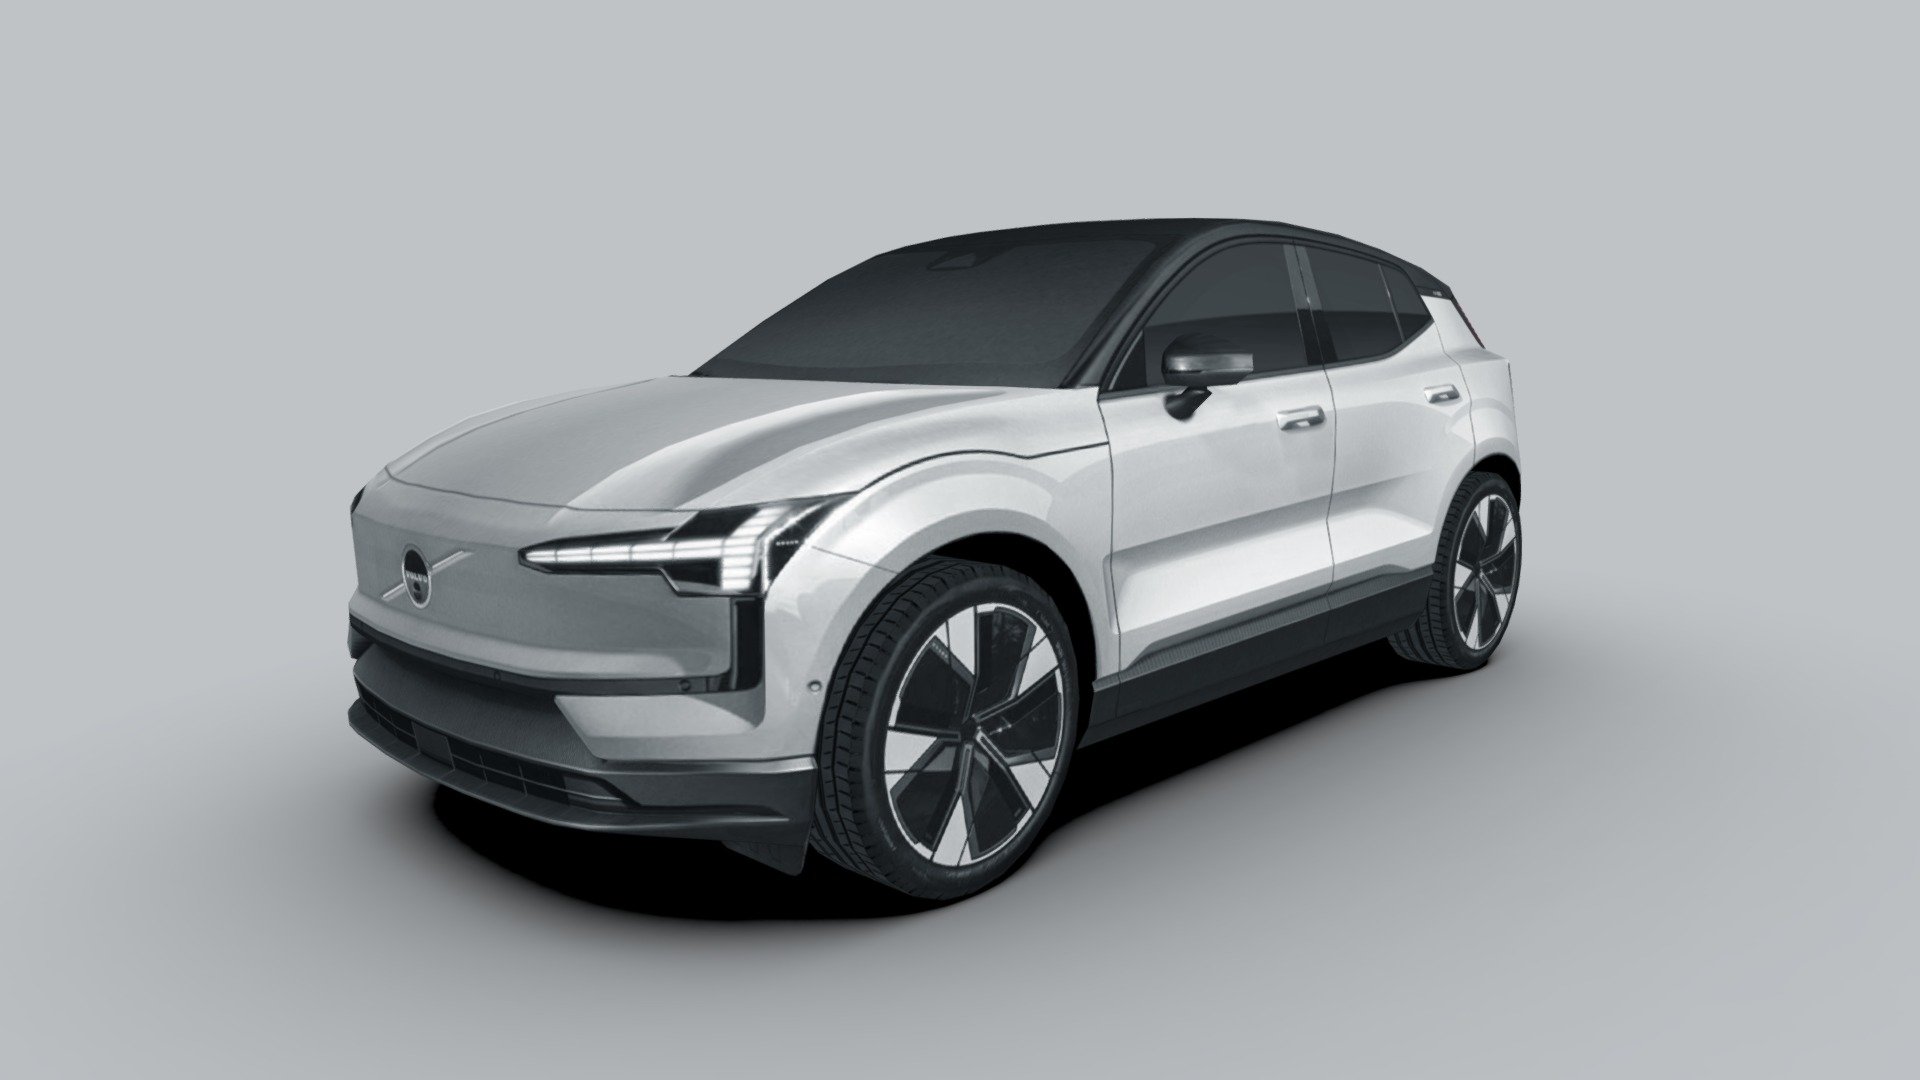 3d model of the 2025 Volvo EX30, an all-electric subcompact crossover SUV.

The model is very low-poly, full-scale, real photos texture (single 2048 x 2048 png).

Package includes 5 file formats and texture (3ds, fbx, dae, obj and skp)

Hope you enjoy it.

José Bronze - Volvo EX30 2025 - Buy Royalty Free 3D model by Jose Bronze (@pinceladas3d) 3d model